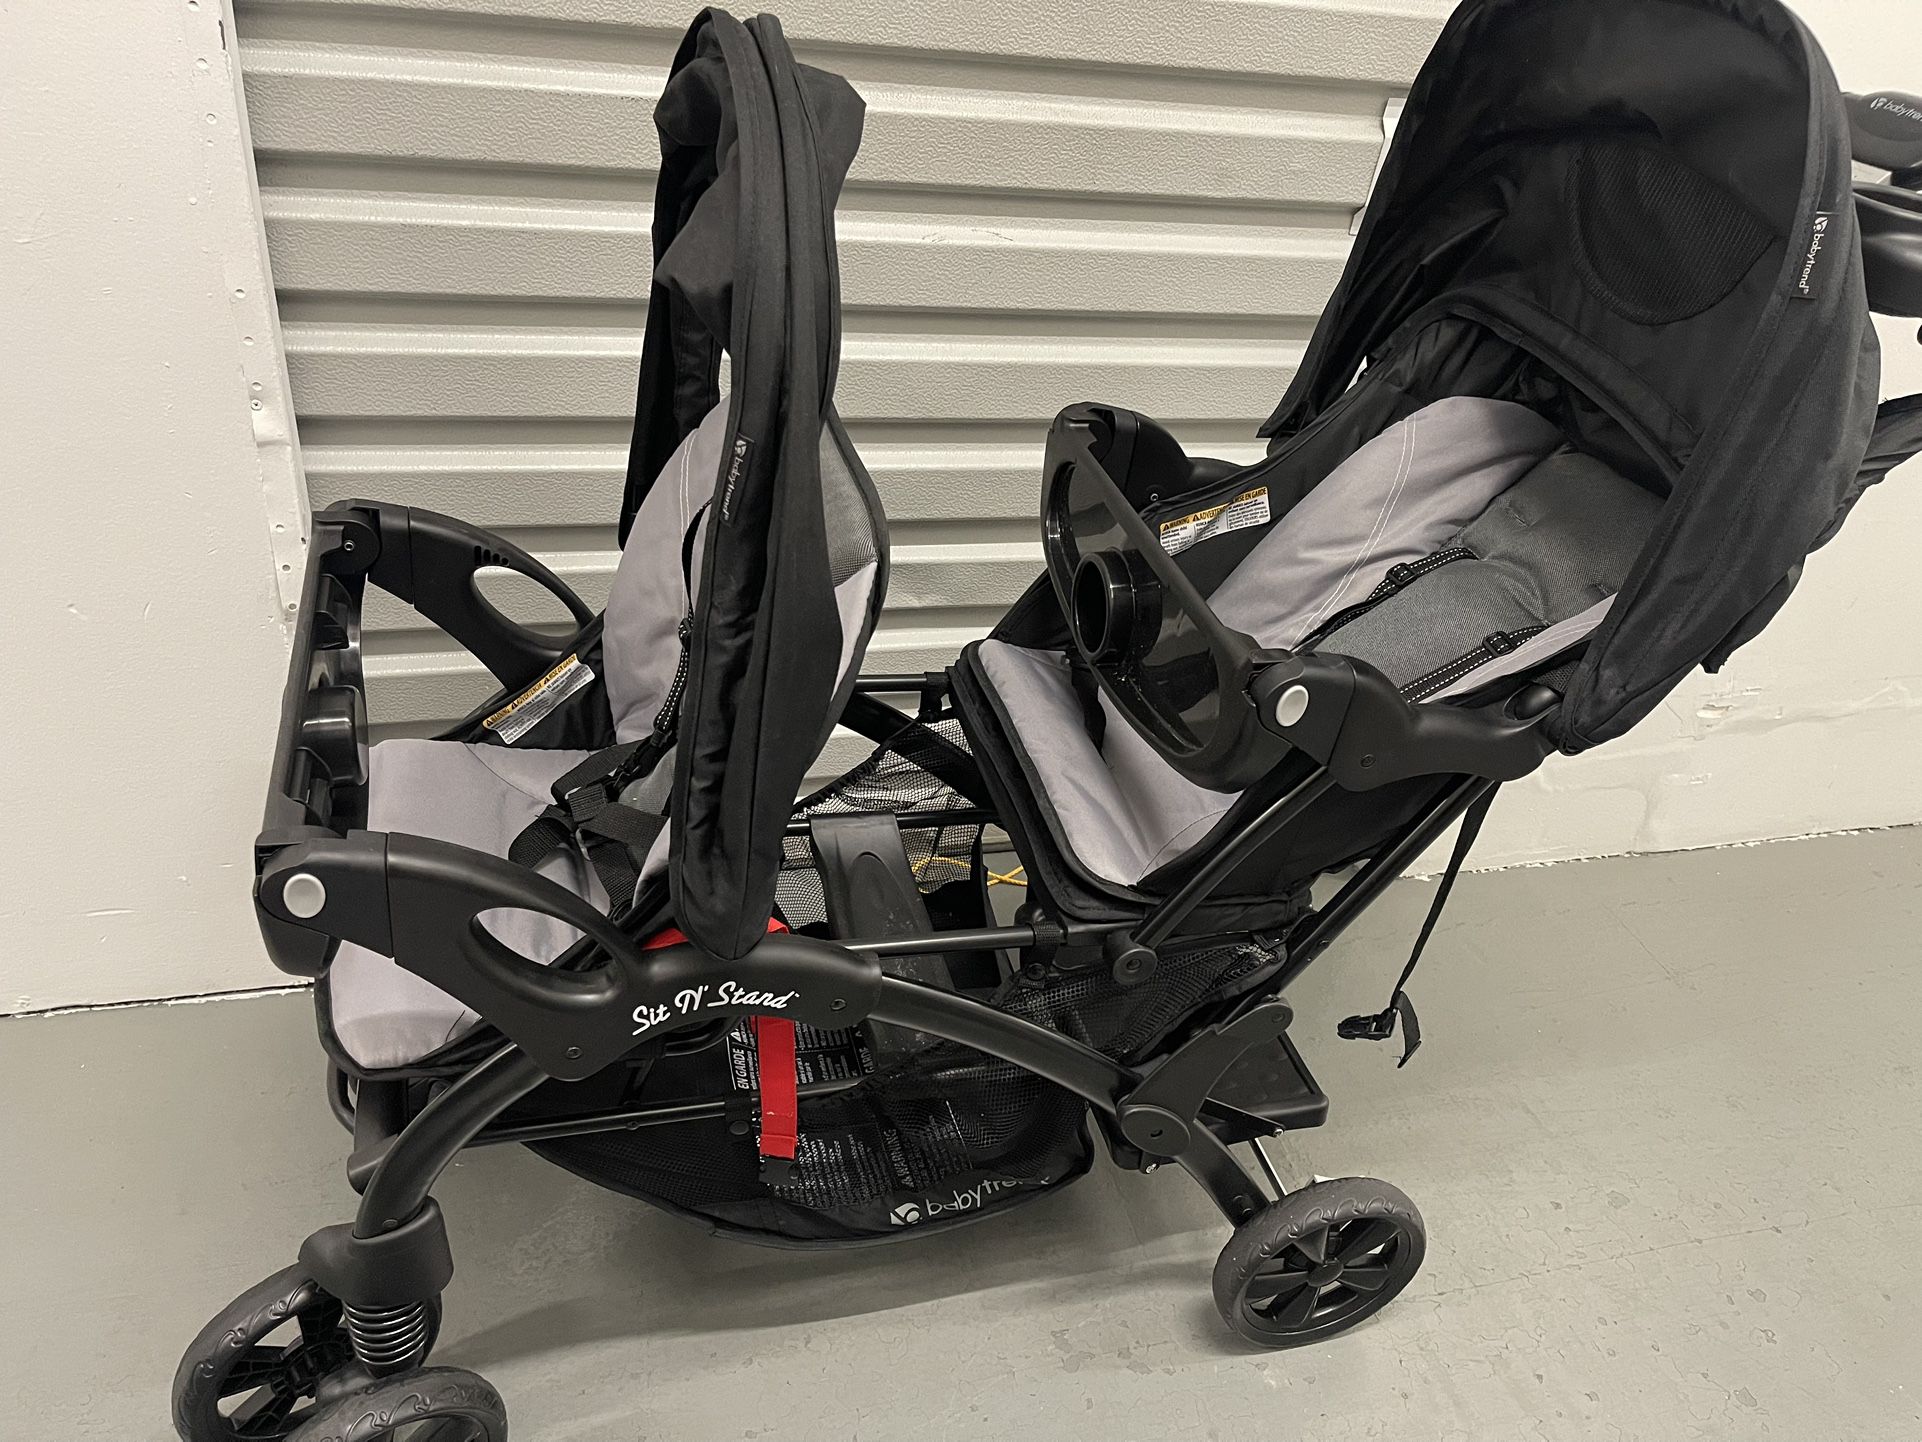 Sit N Stand Double Stroller